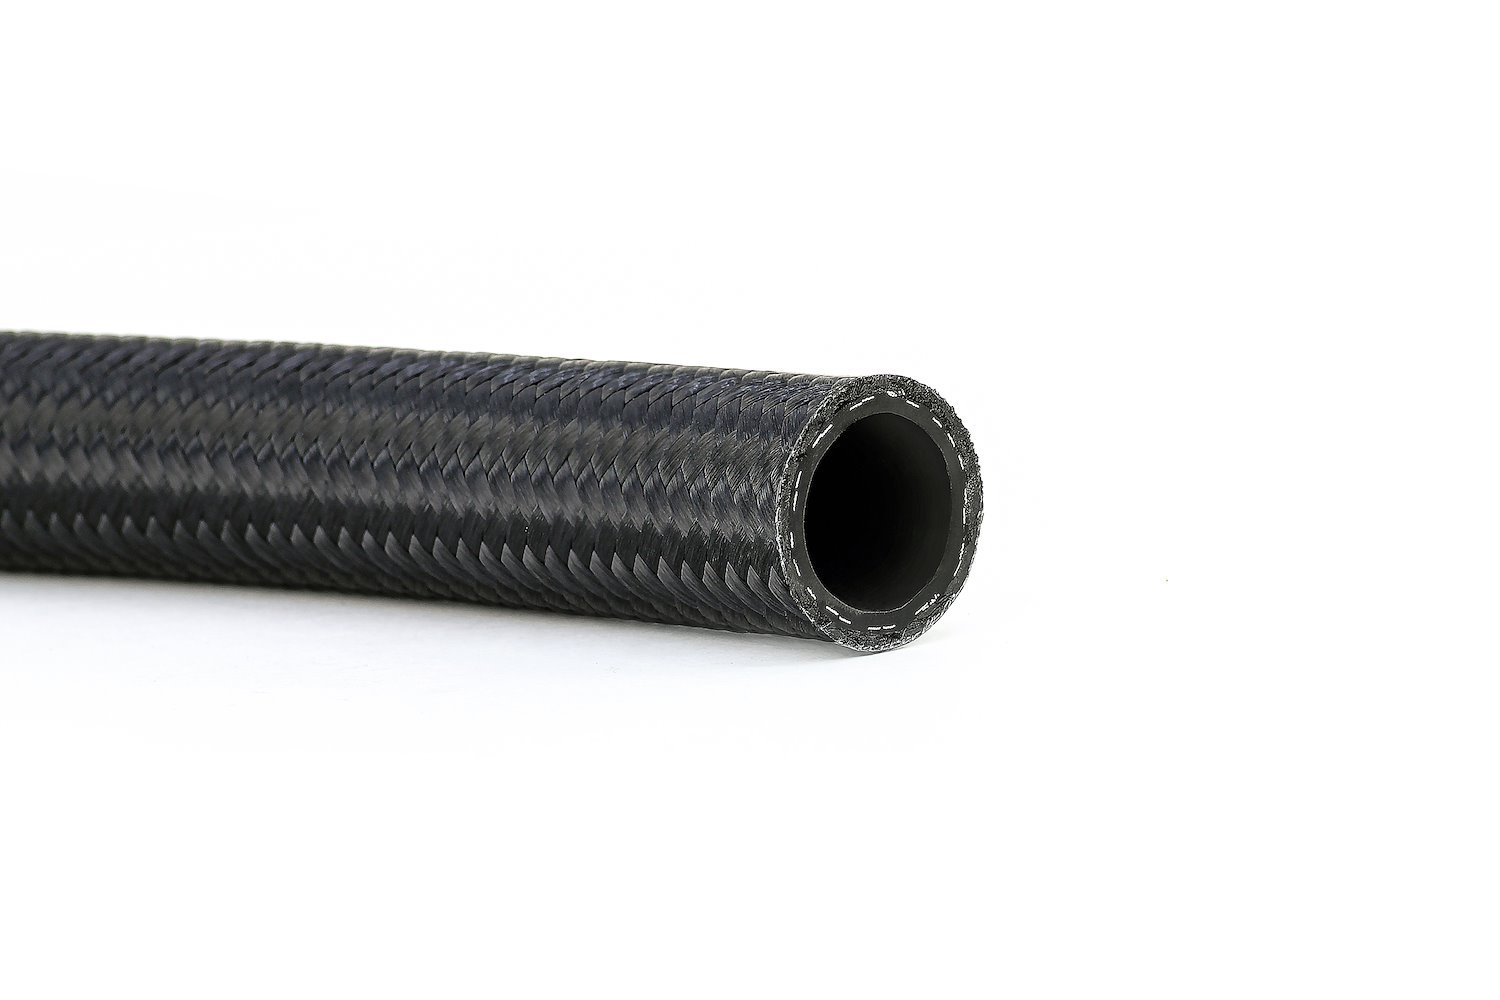 250-10 250 Series Nylon Braided Rubber Hose, Stainless Steel Reinforced Hose, For 250 Series Reusable An Fittings